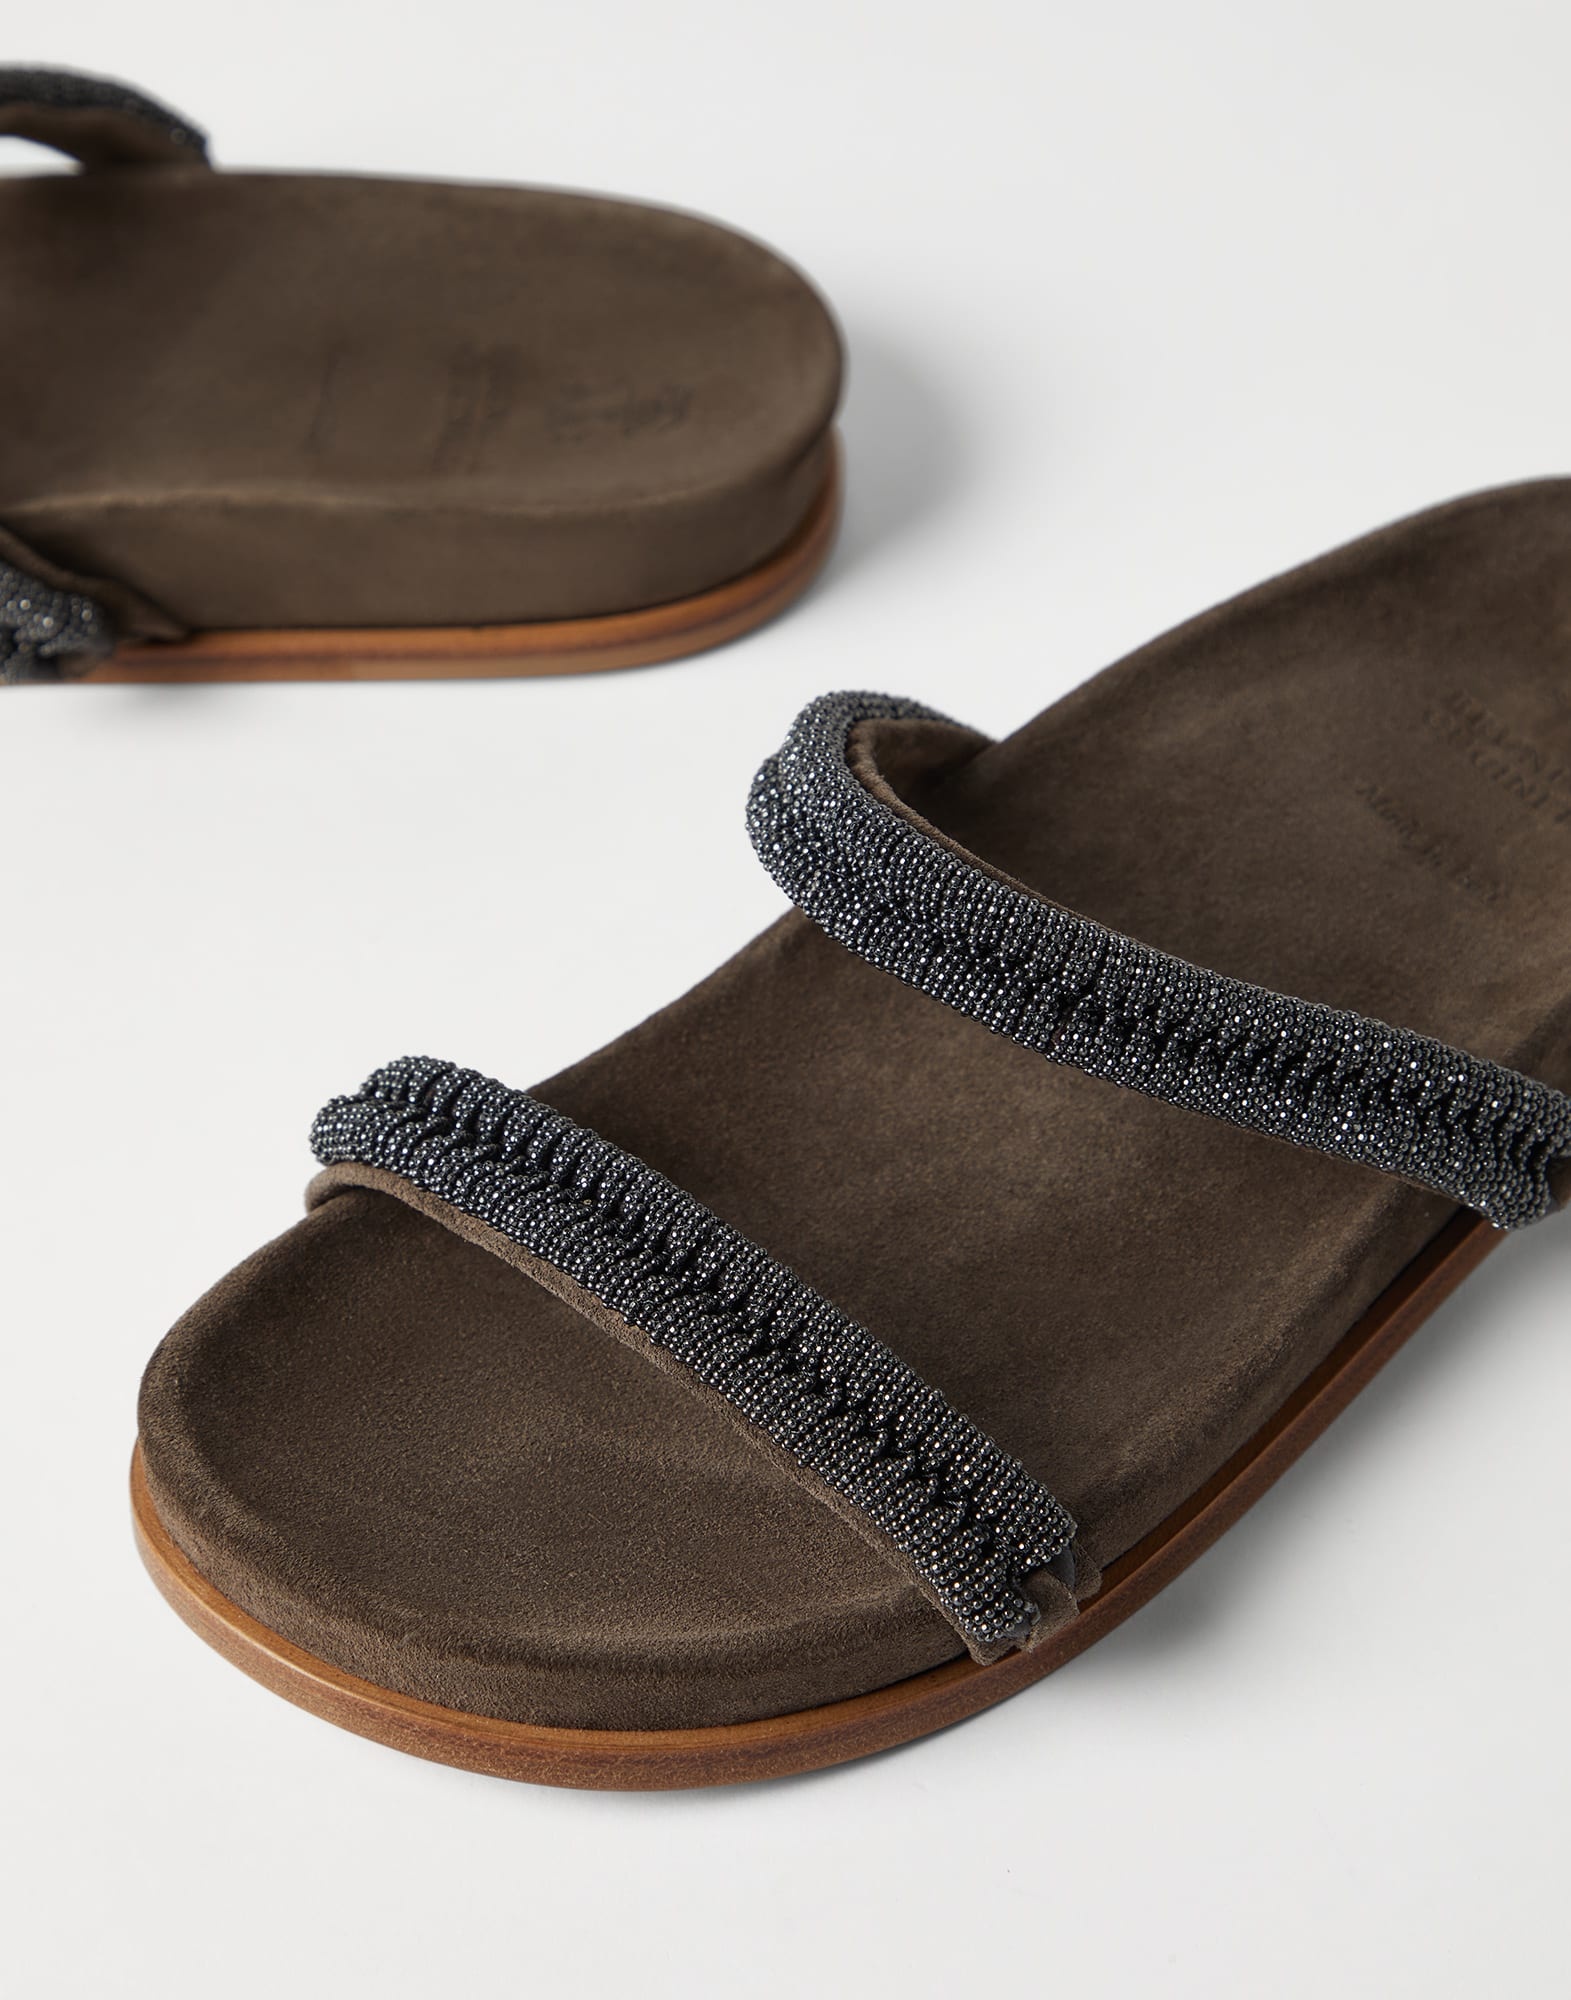 Suede slides with precious braided straps - 3